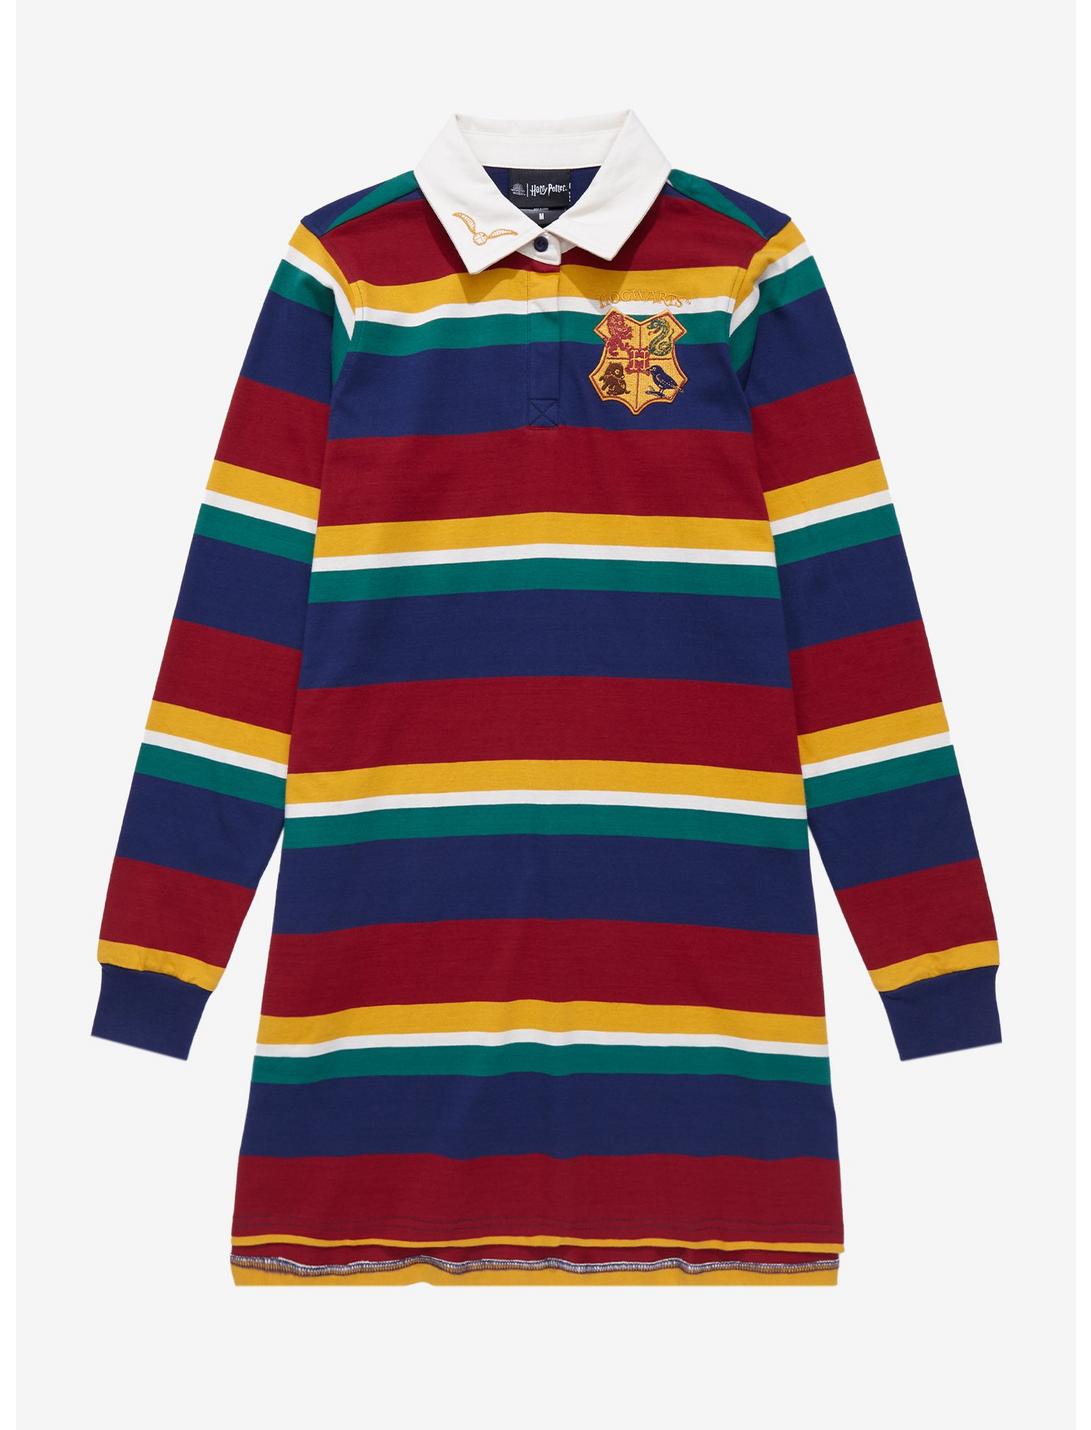 Harry Potter Striped Rugby Shirt Dress - BoxLunch Exclusive, MULTI, hi-res